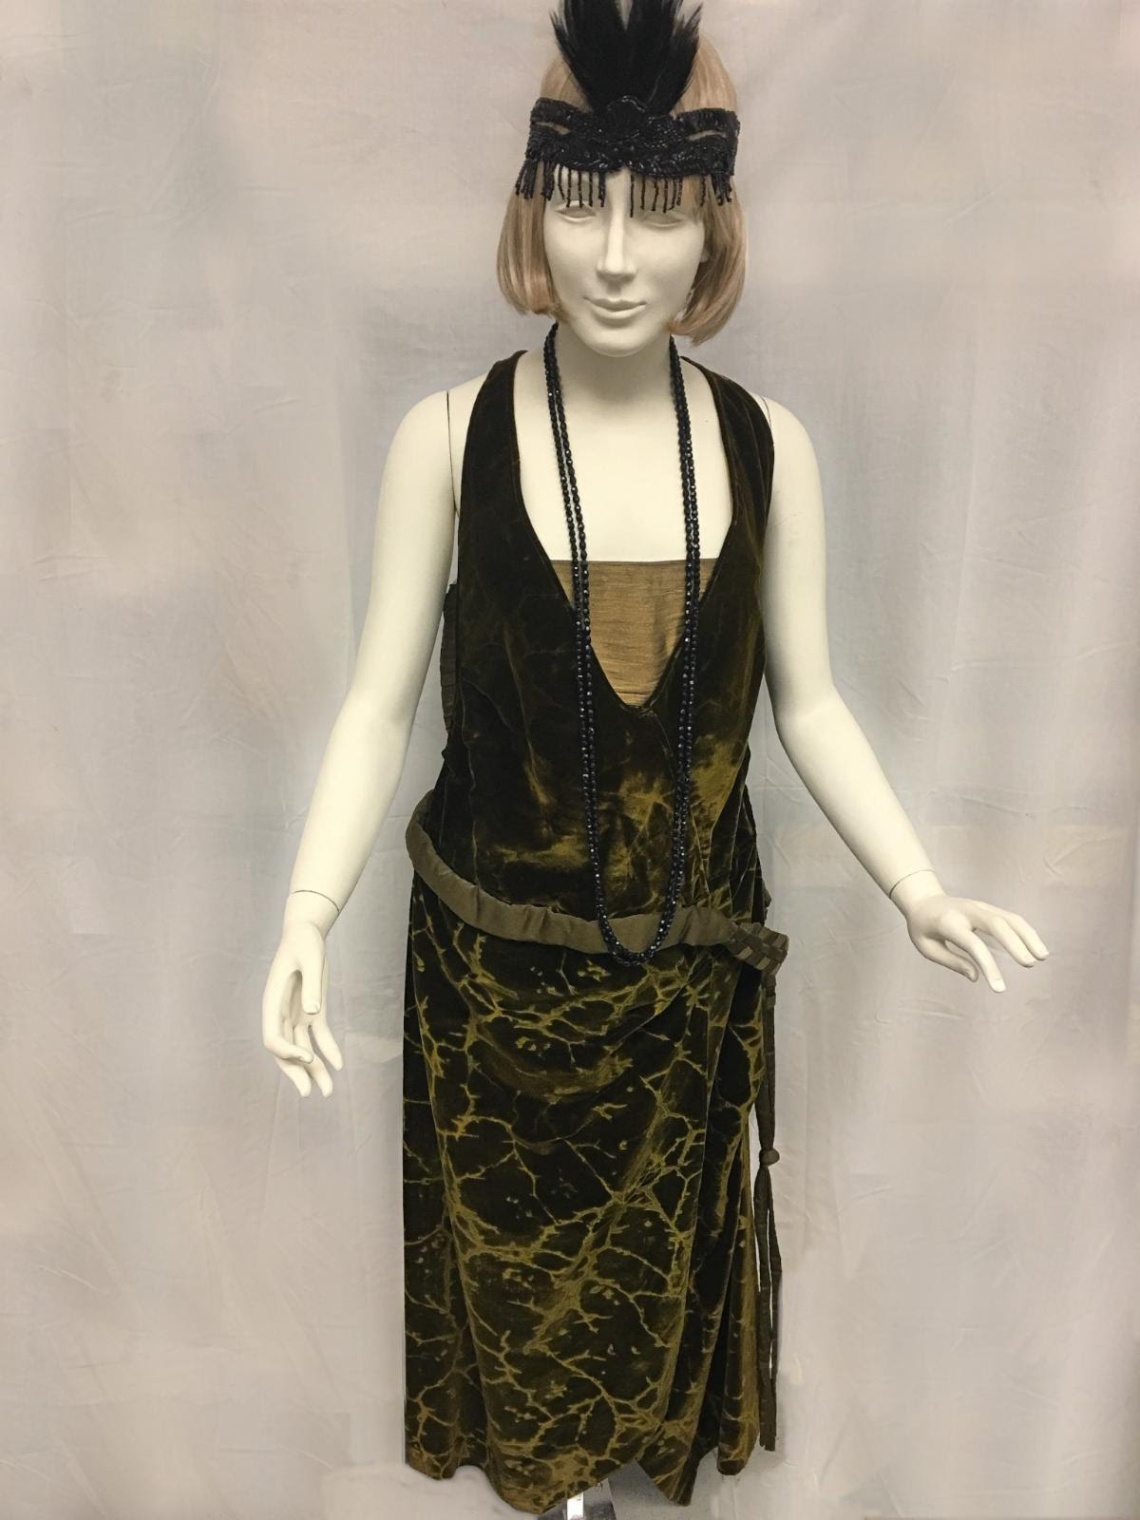 1920s formal fashion Bulan 1 Clothing & Textiles: Evening Gowns of the s - New Canaan